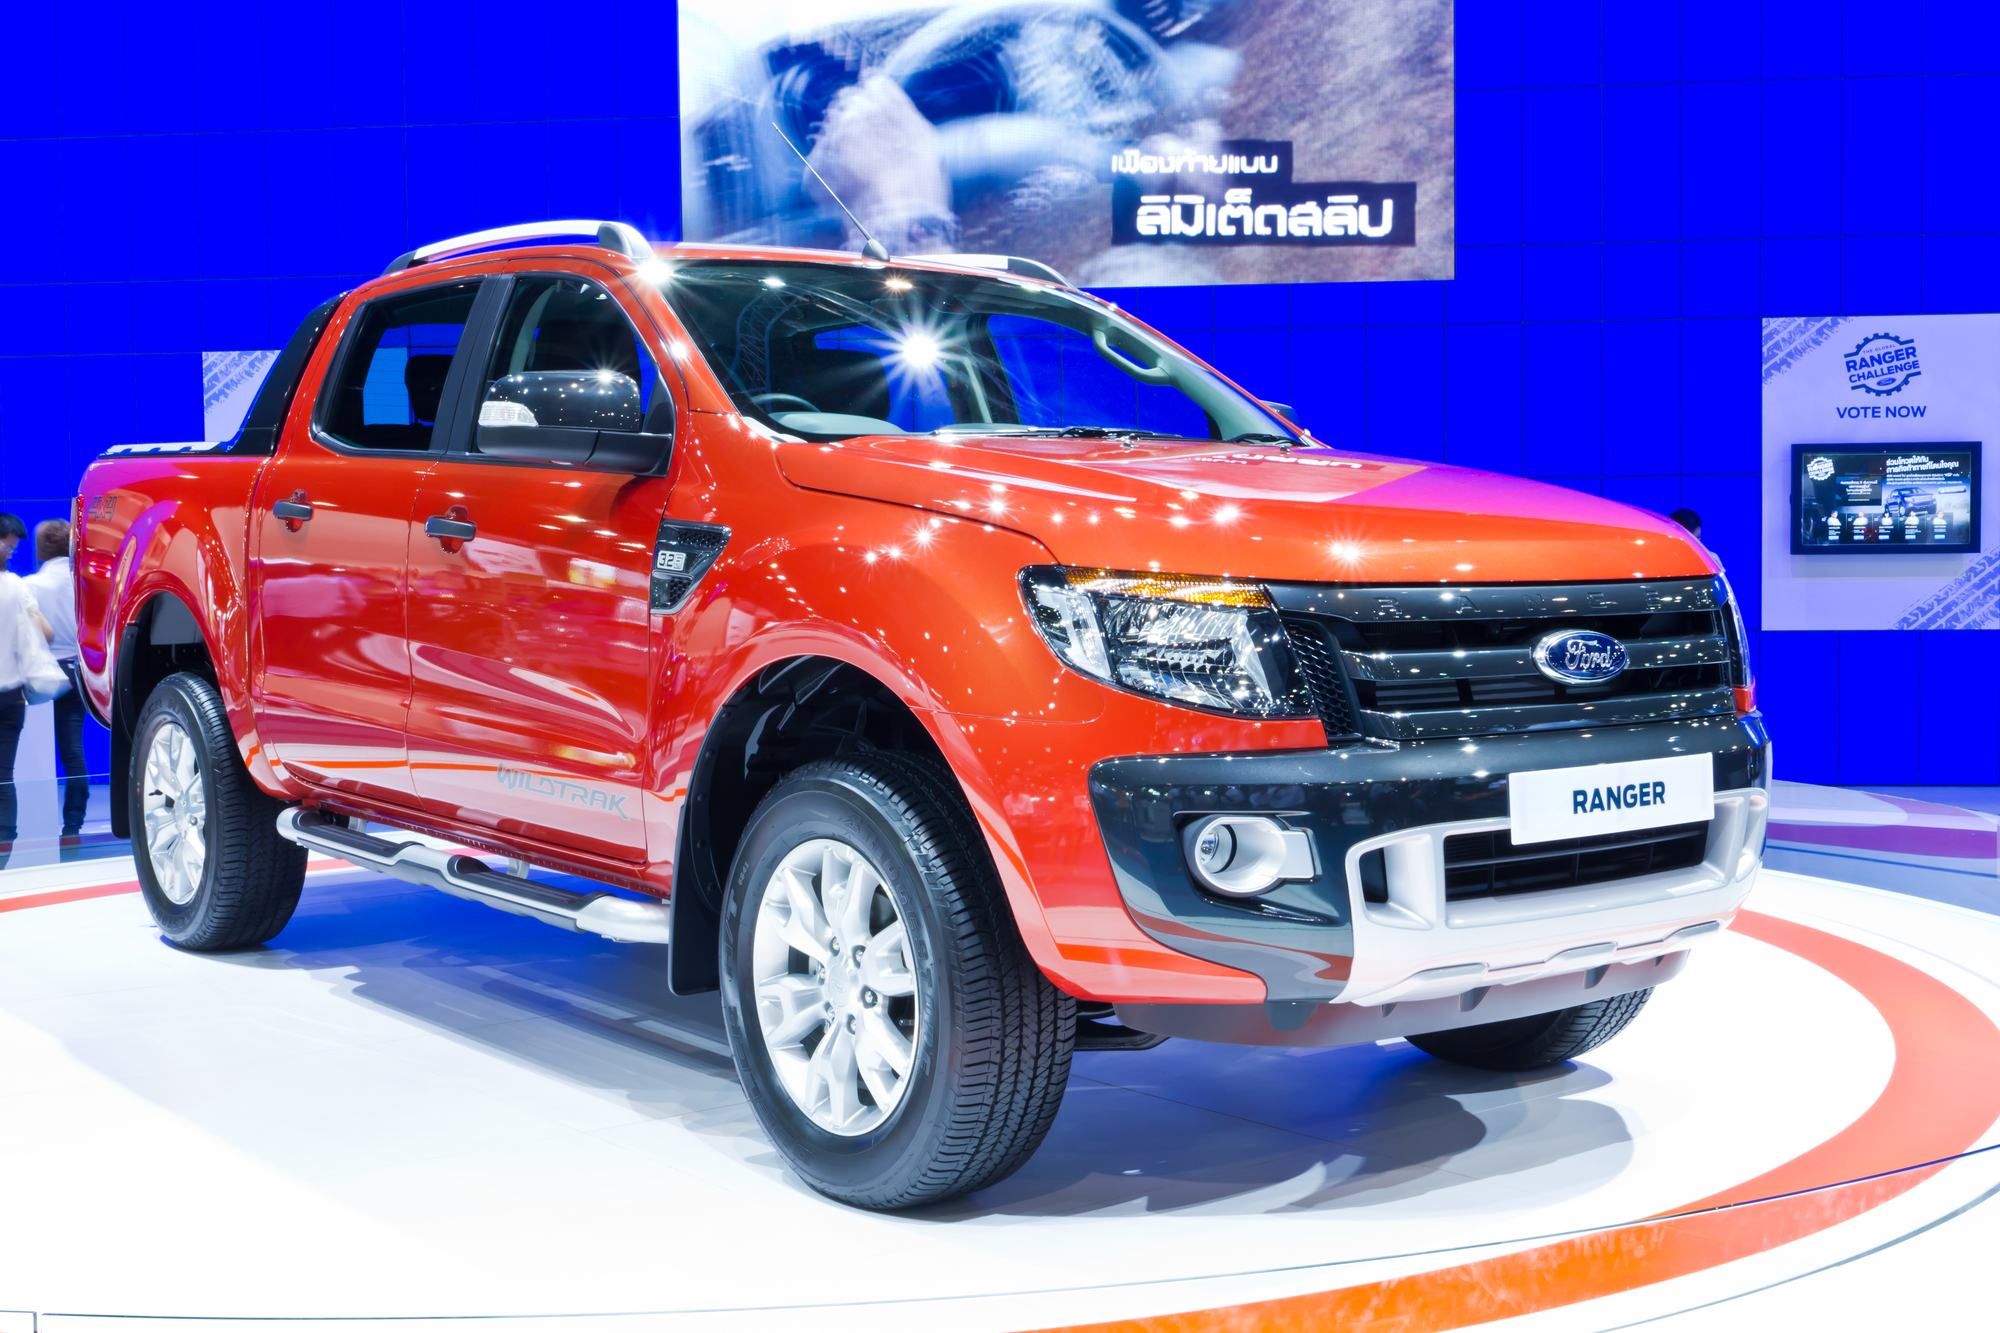 A Ford Ranger regarding the Ford cheat device class action lawsuits filed